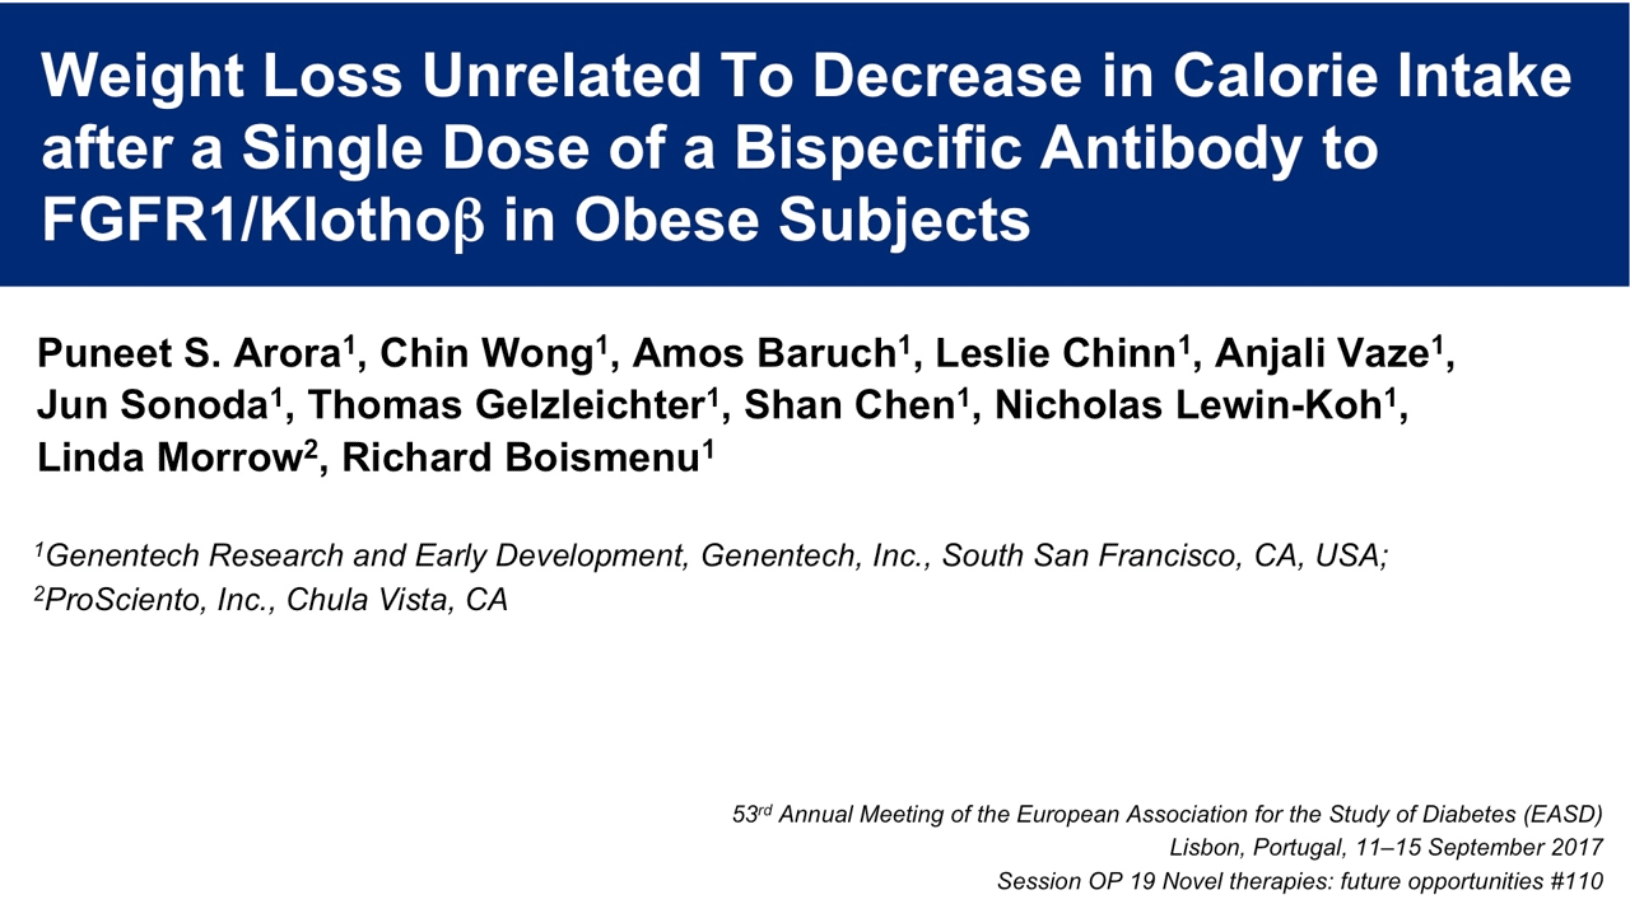 Weight loss unrelated to decrease in calorie intake after a single dose of a bispecific antibody to FGFR1/Klothoβ in obese subjects thumbnail